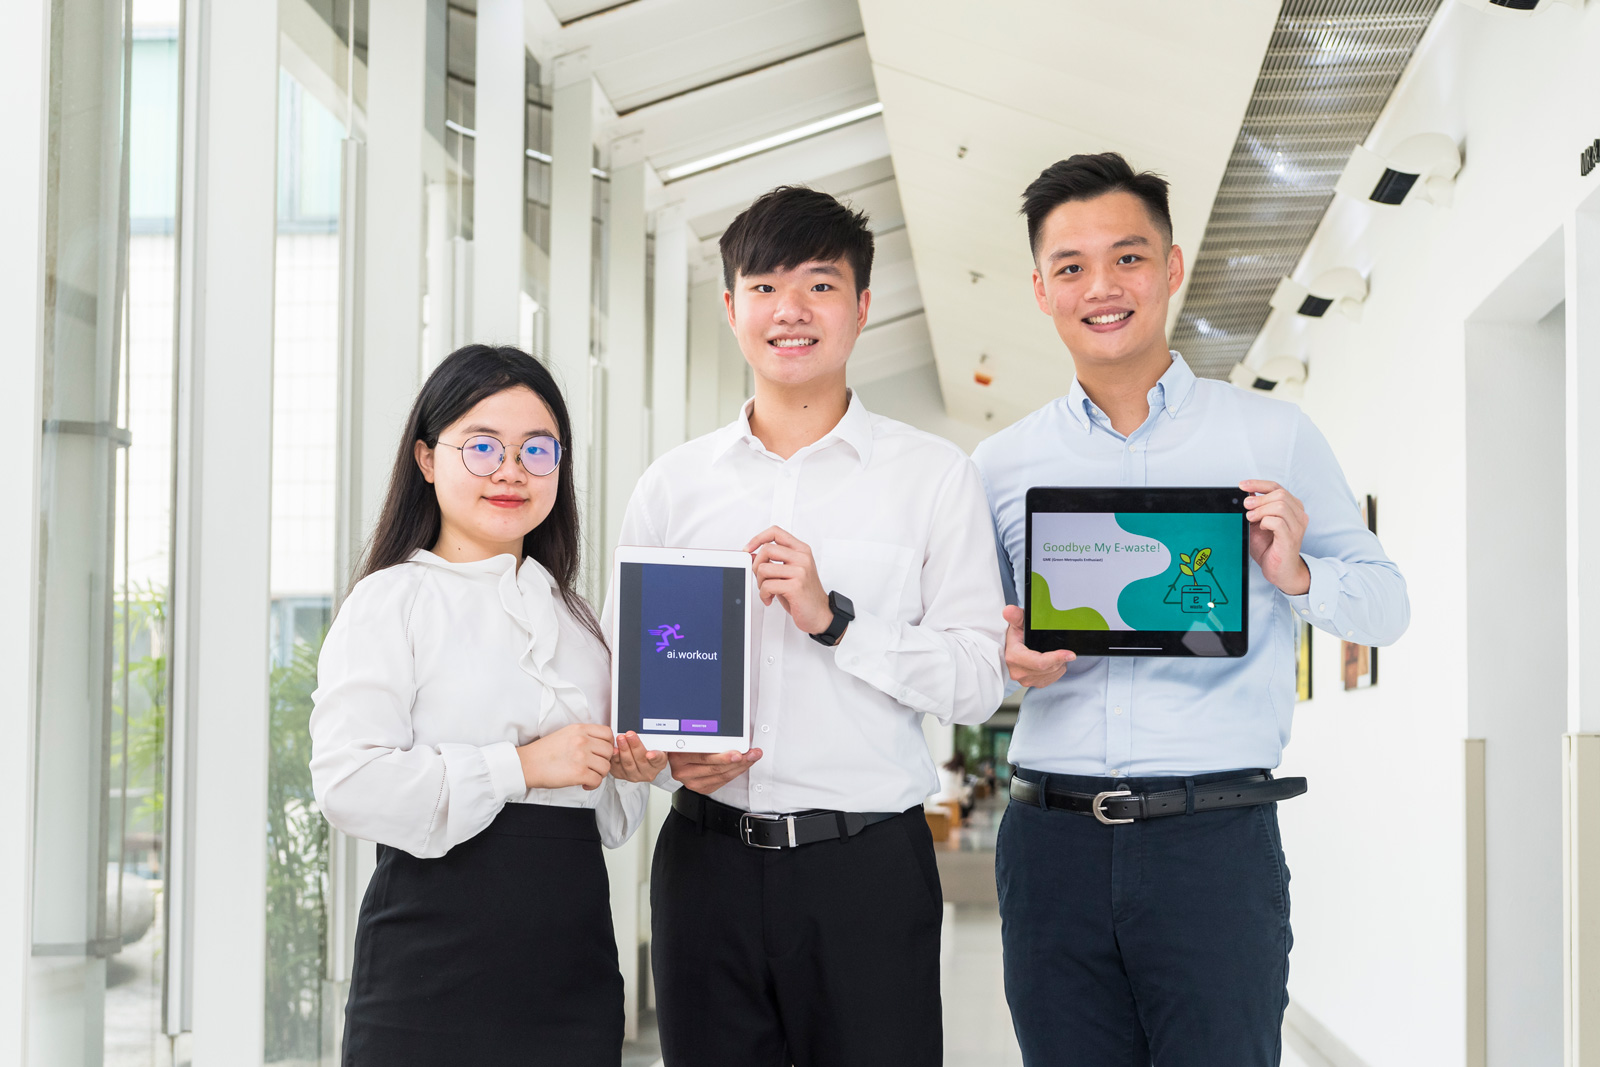 (From left) Natalie Tam, Ken Kwok and Manson Mak were among the final winning teams at this year’s UAiTED Innovation Competition.